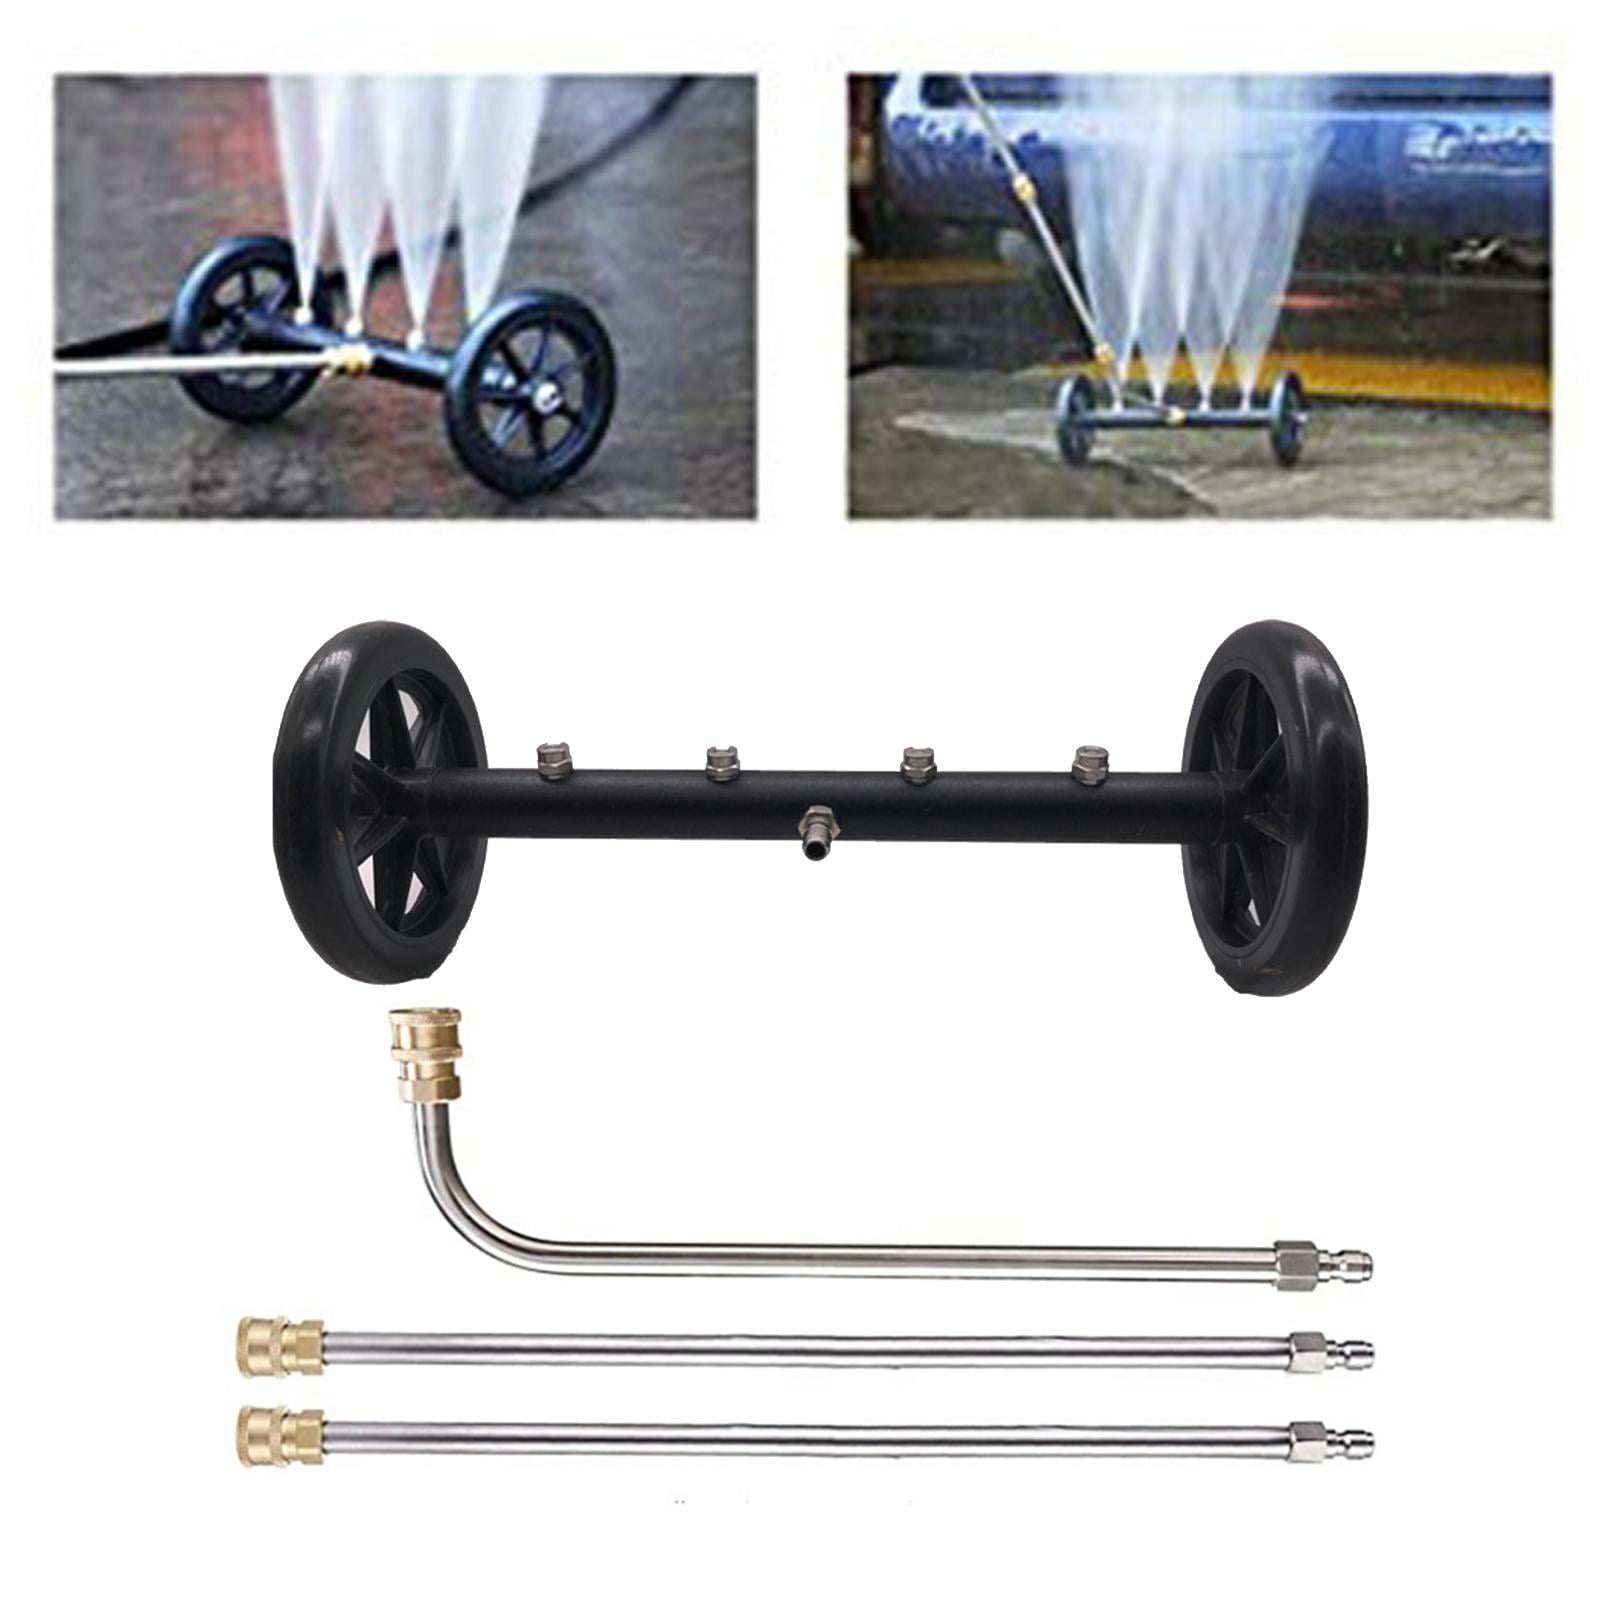 Pressure Washer Undercarriage Cleaner, Undercarriage Pressure Washer 4000  PSI, Car Wash Cleaner- 13 Inch 1500 PSI+ (6 Nozzles Undercarriage) 